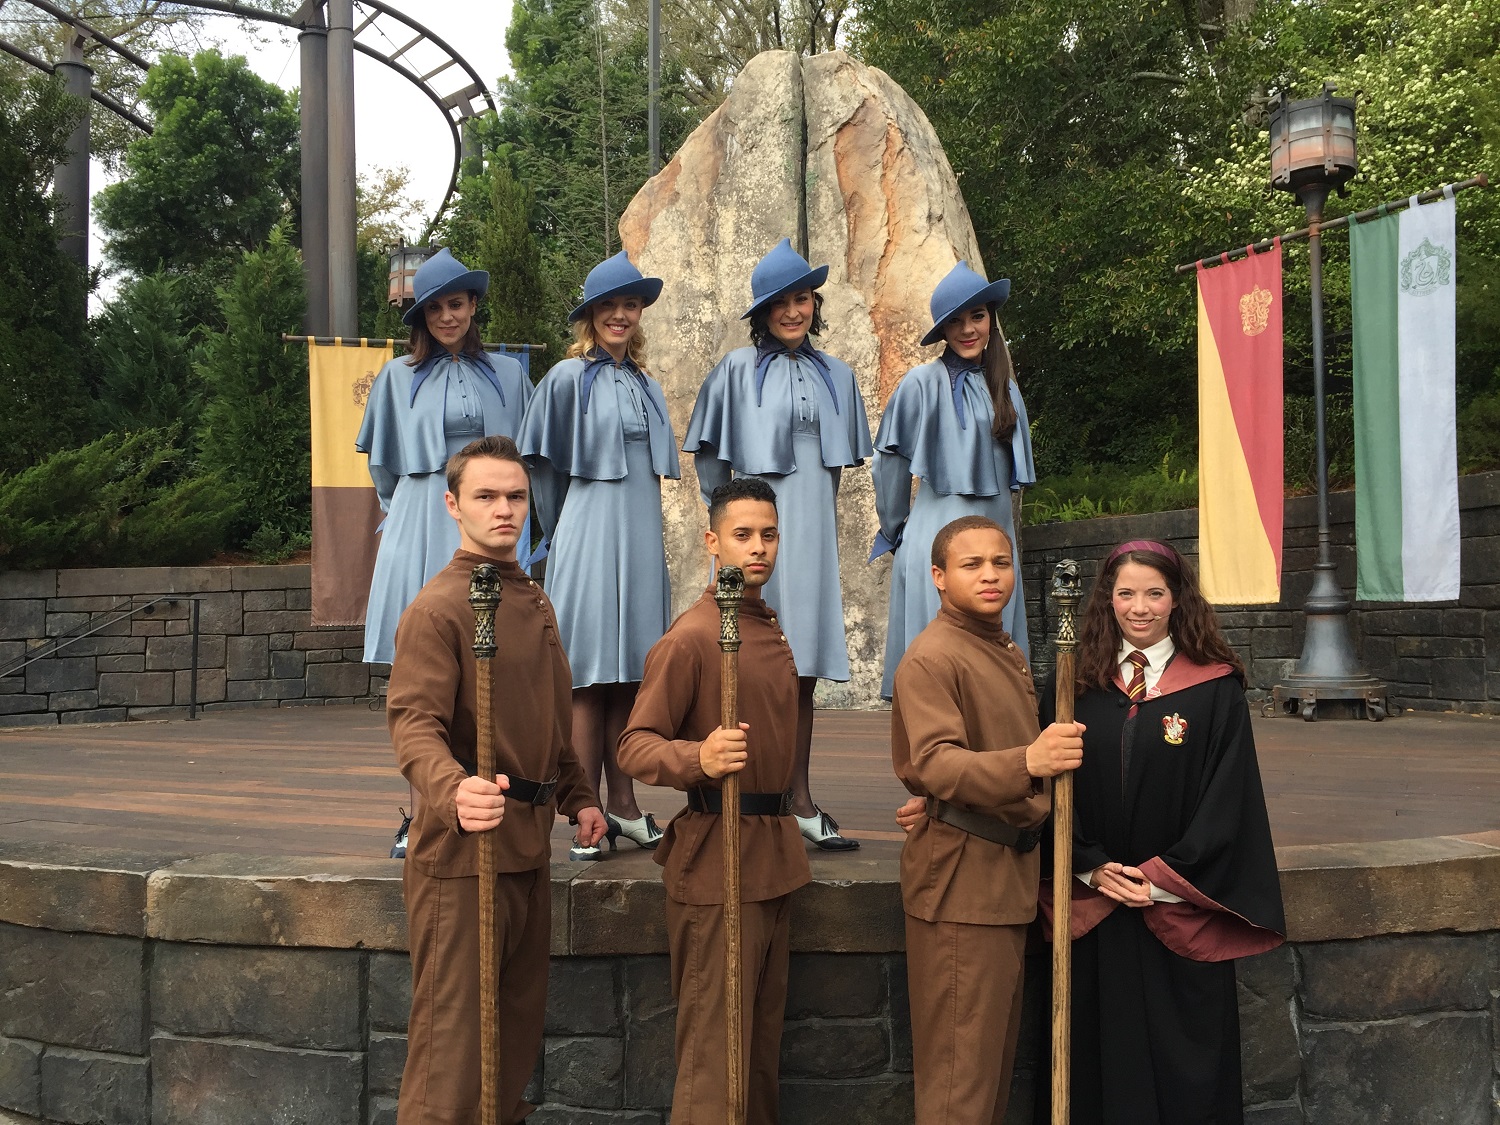 Triwizard Spirit Rally Performers - Harry Potter no Islands of Adventure